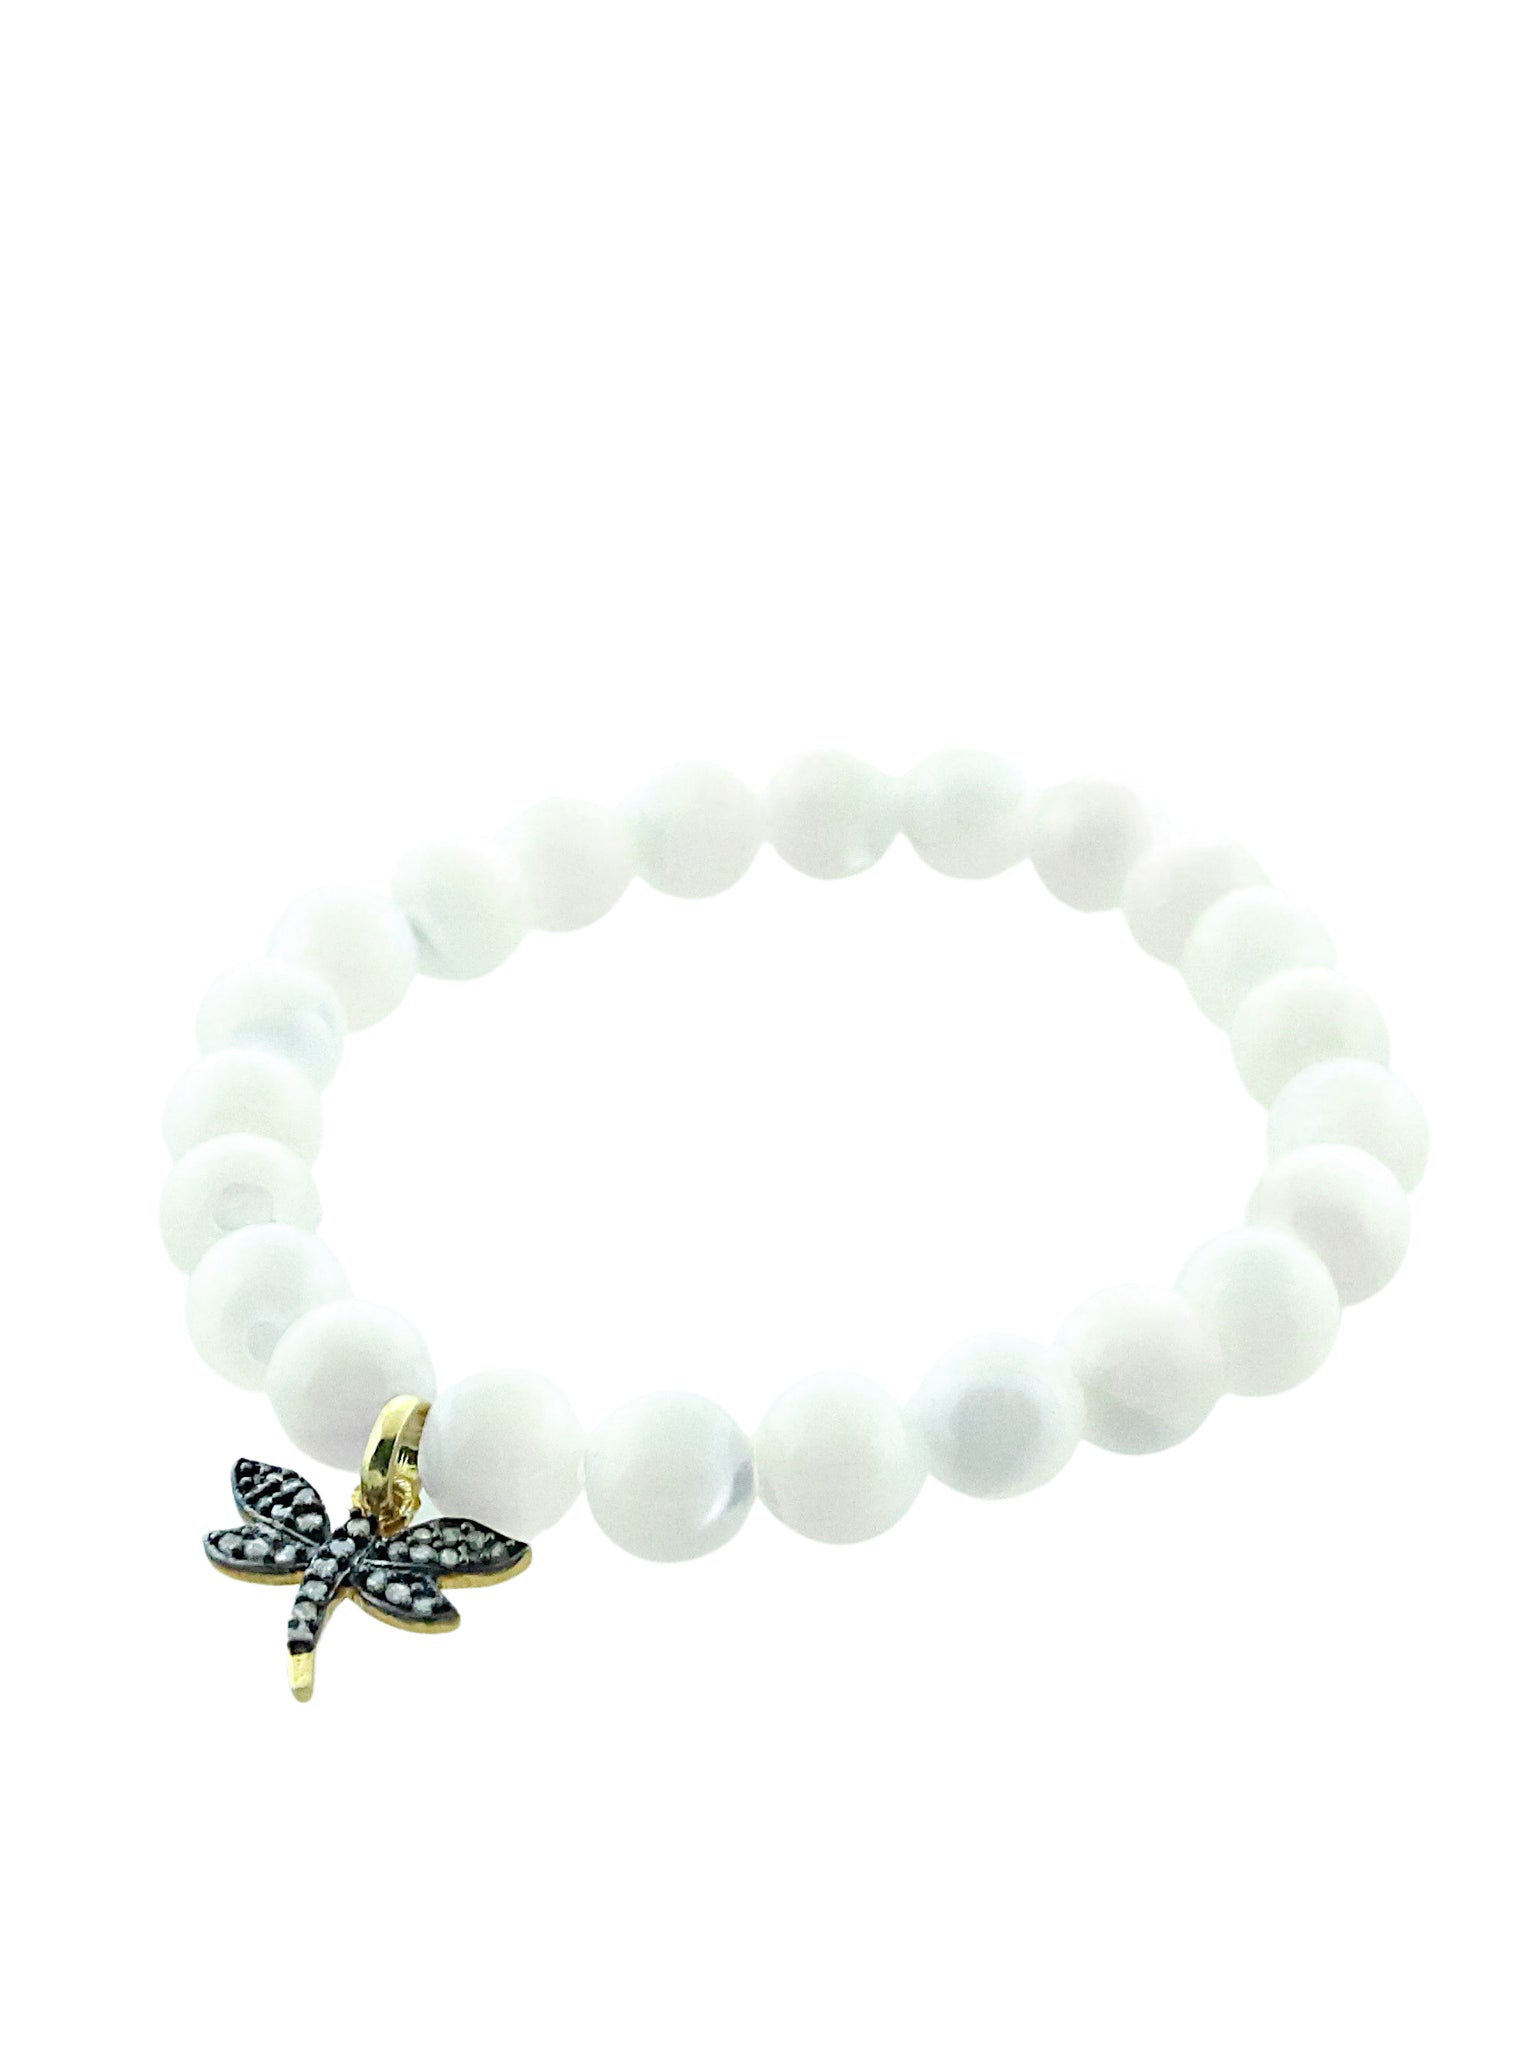 Mother of Pearl with Pave Diamond Dragonfly